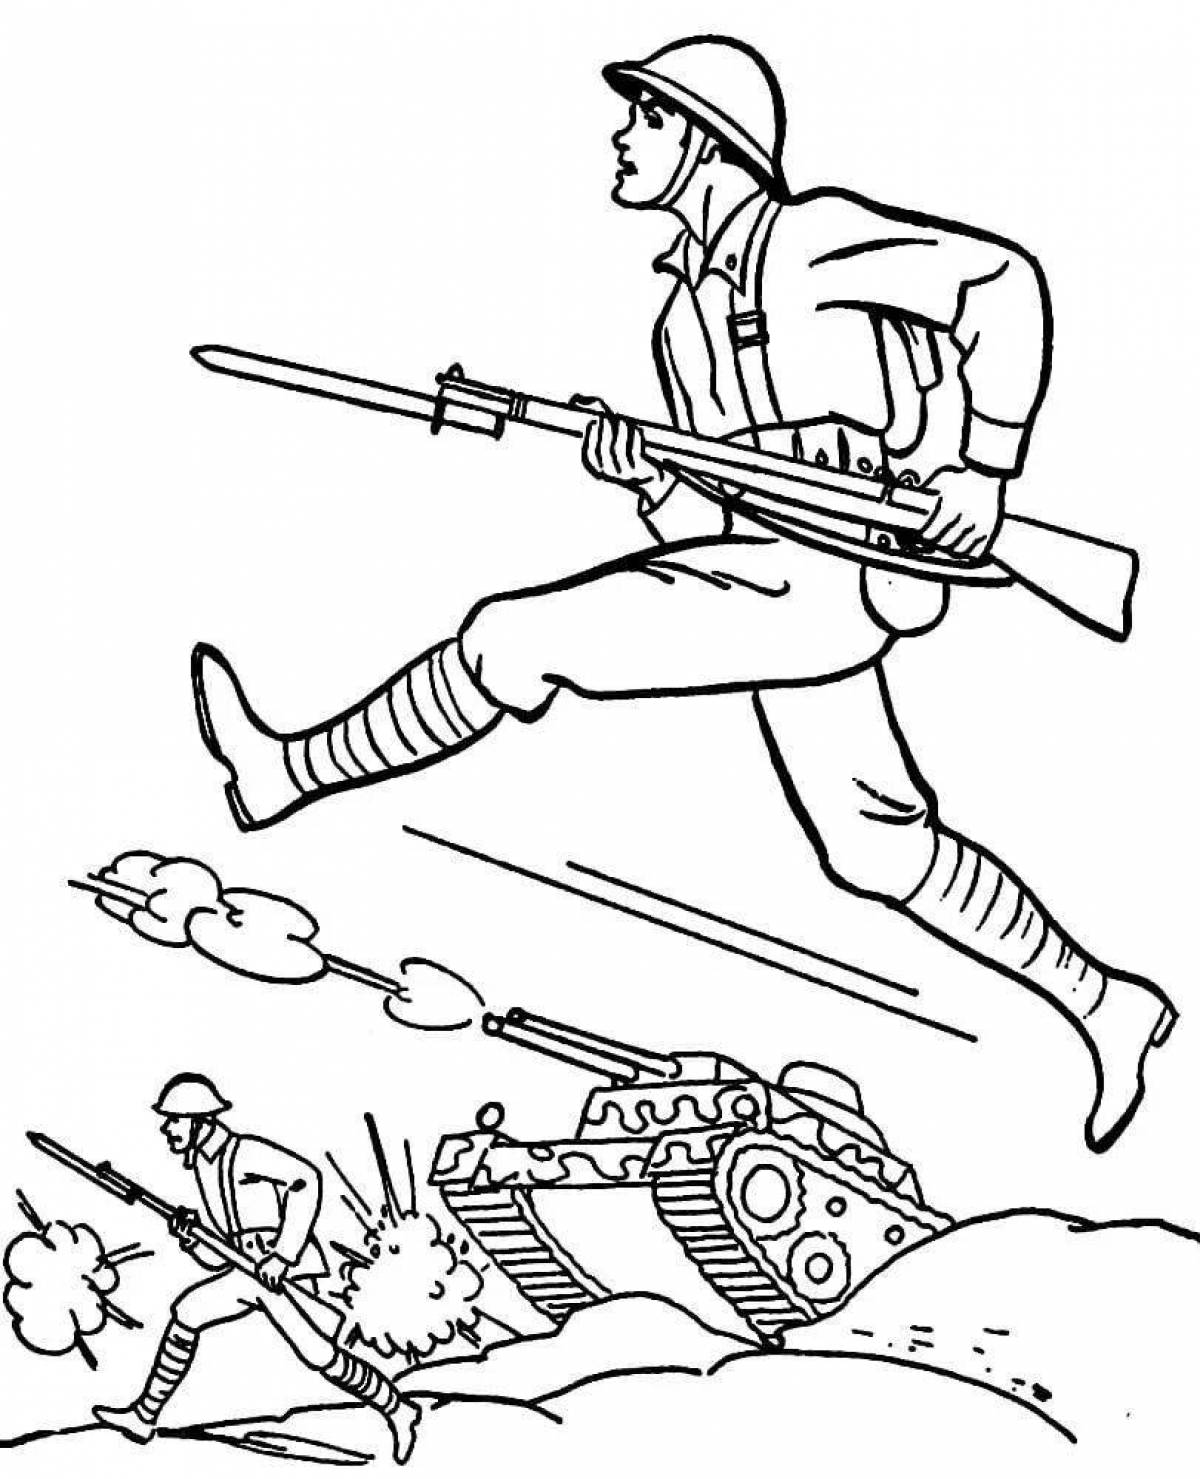 Creative soldier coloring for children